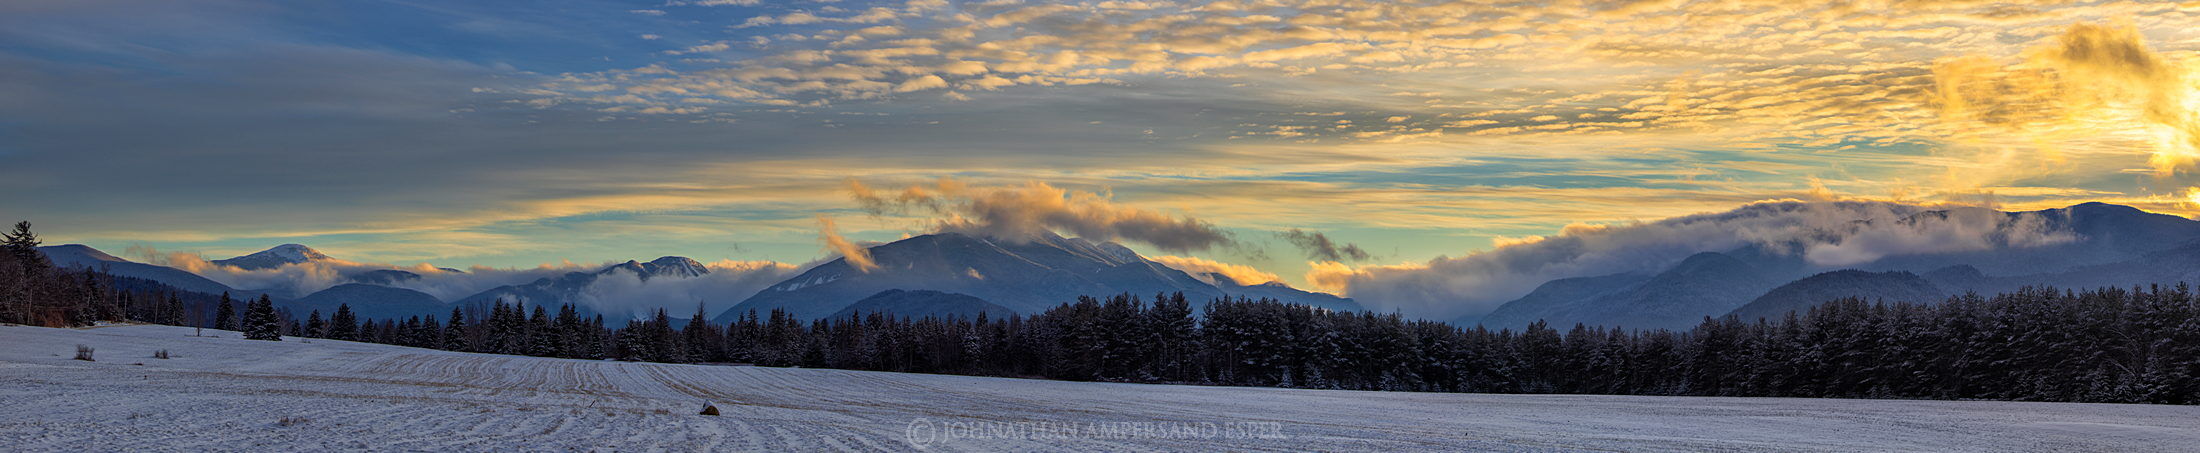 Adirondack Loj Rd,Adirondack Loj Road,Adirondack Loj Road fields,field,High Peaks,High Peaks panorama,winter panorama,Mt Marcy...